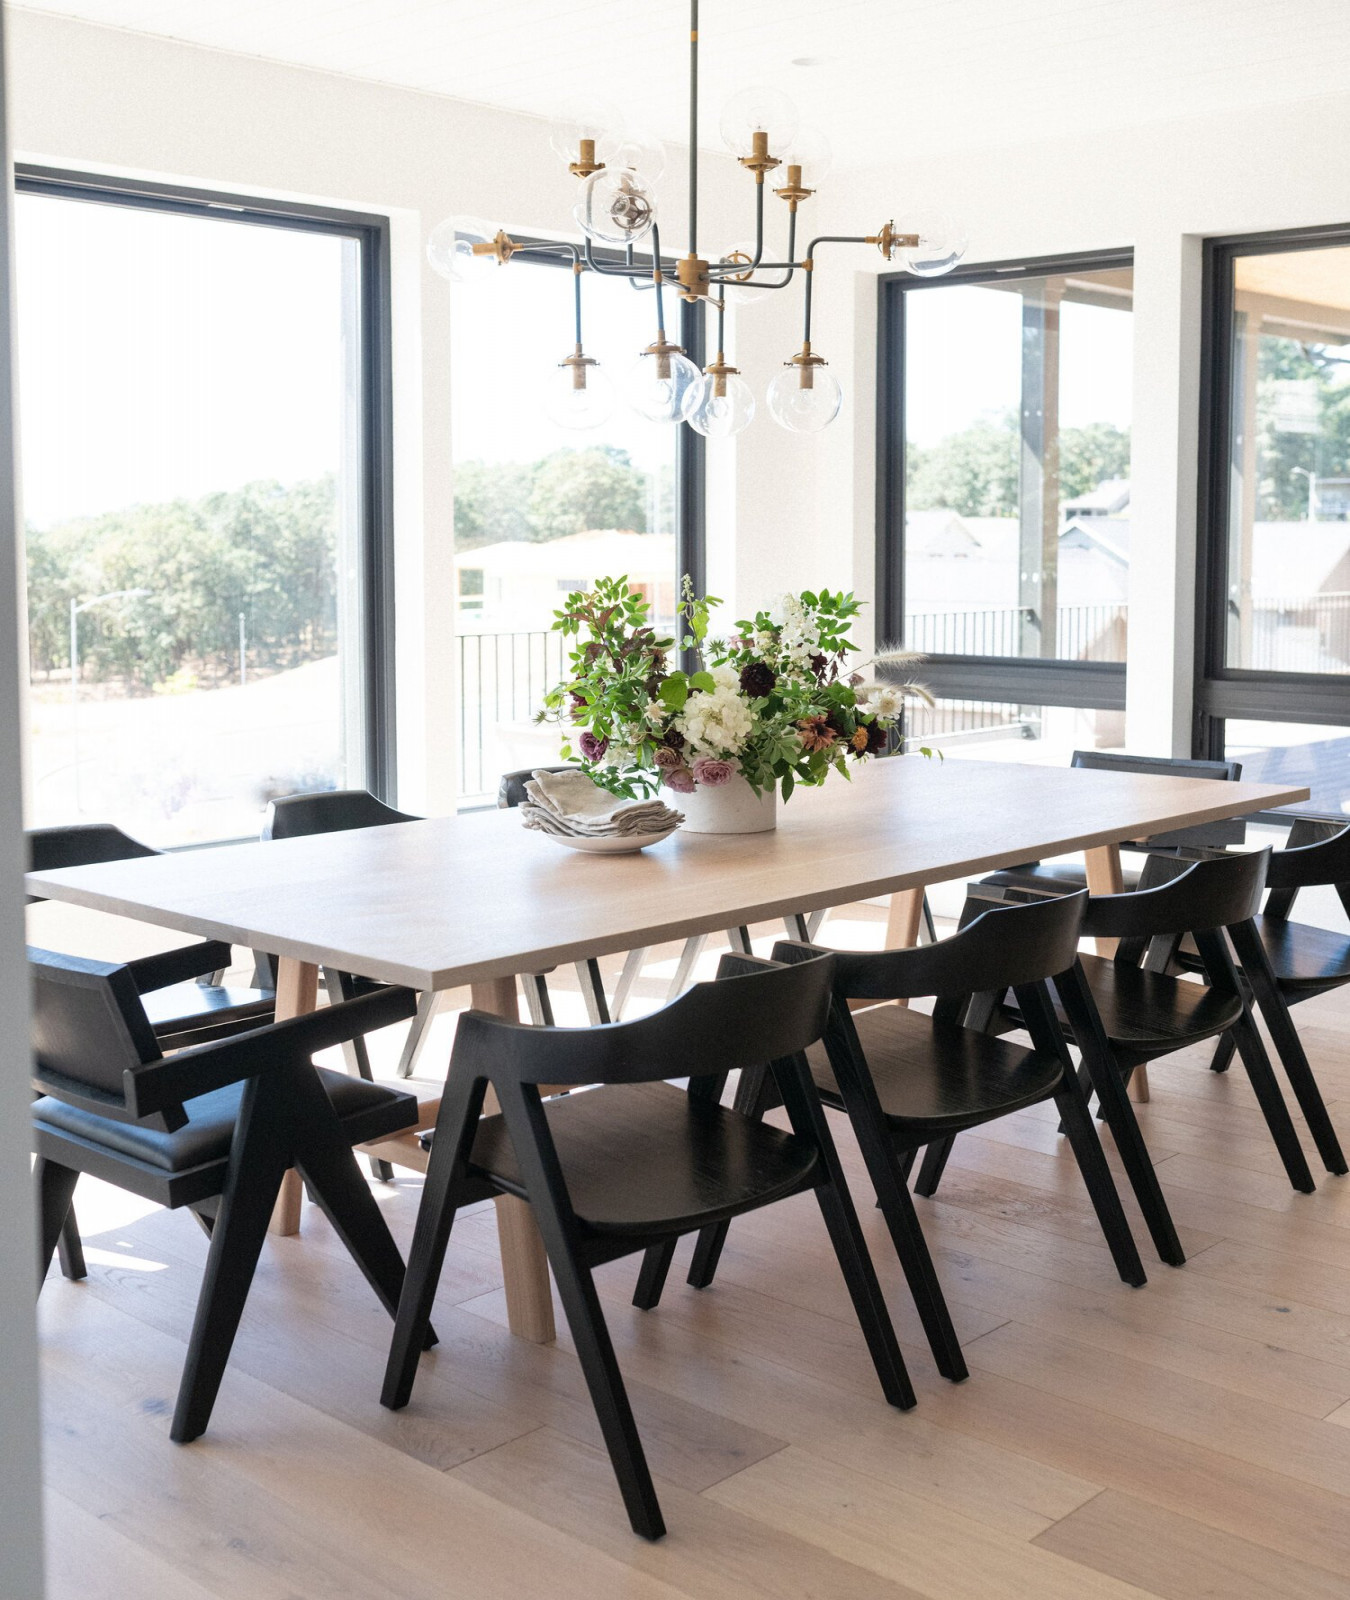 Things to Consider When Choosing the Perfect Black Dining Chairs